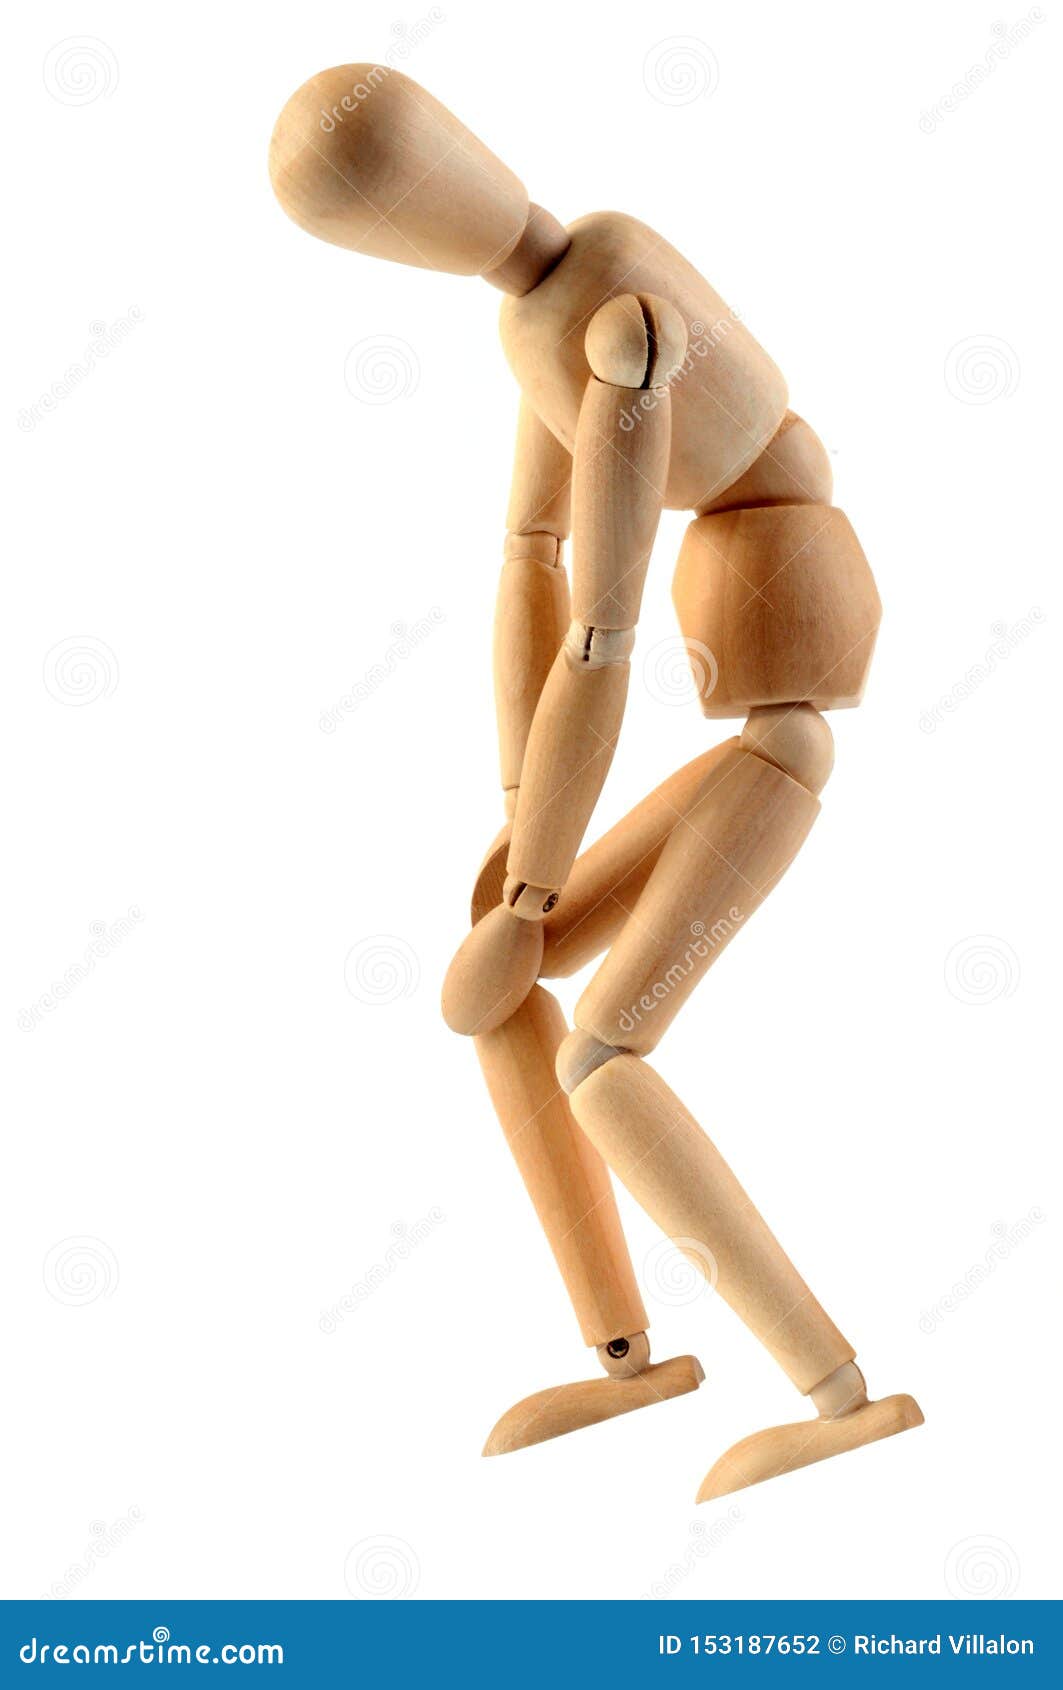 wooden mannequin with knee pain on white background